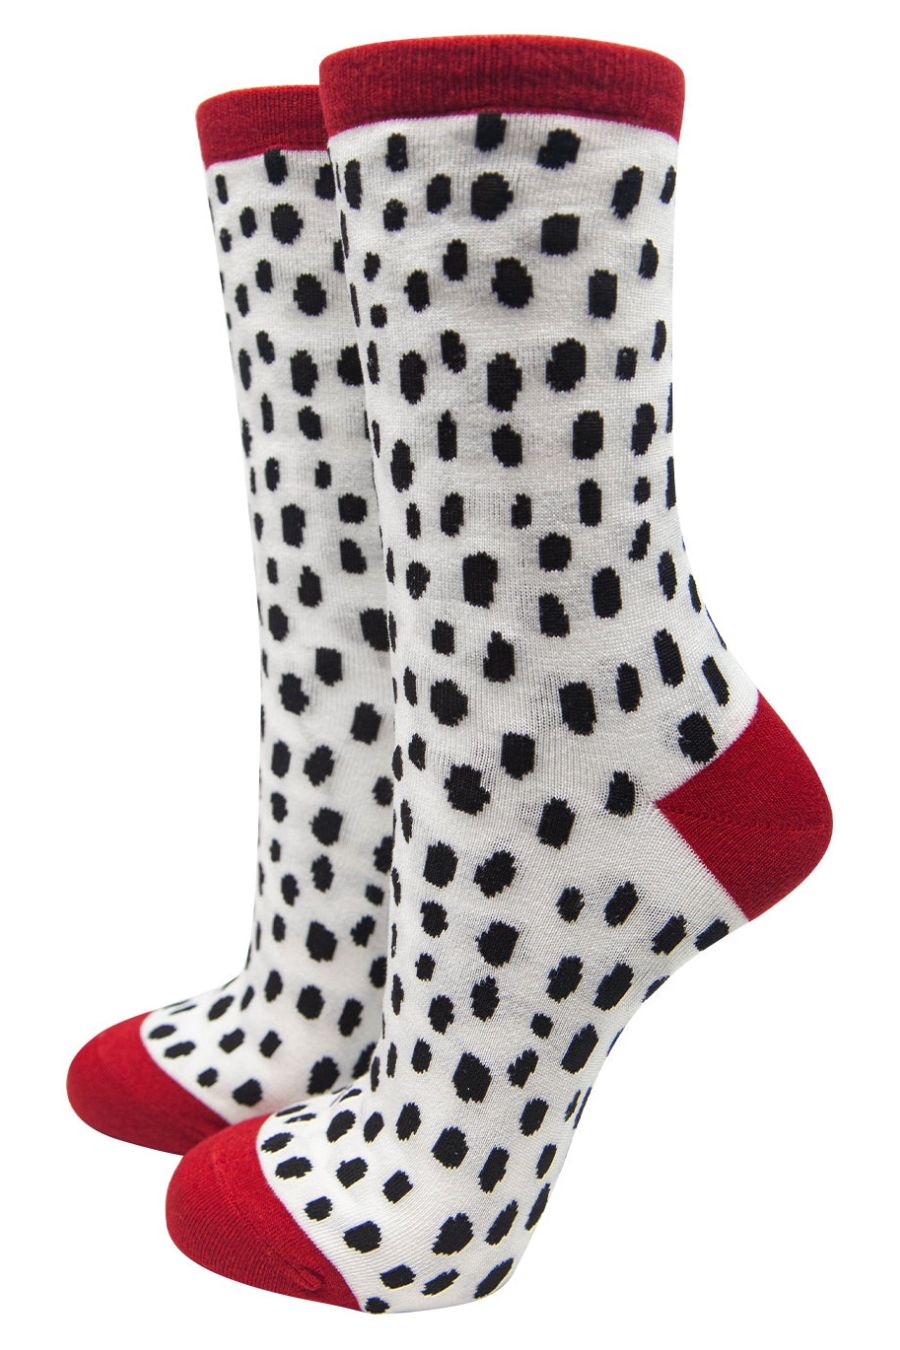 bamboo ankle socks with an all over white and black dalmatian print., red toe, heel and trim